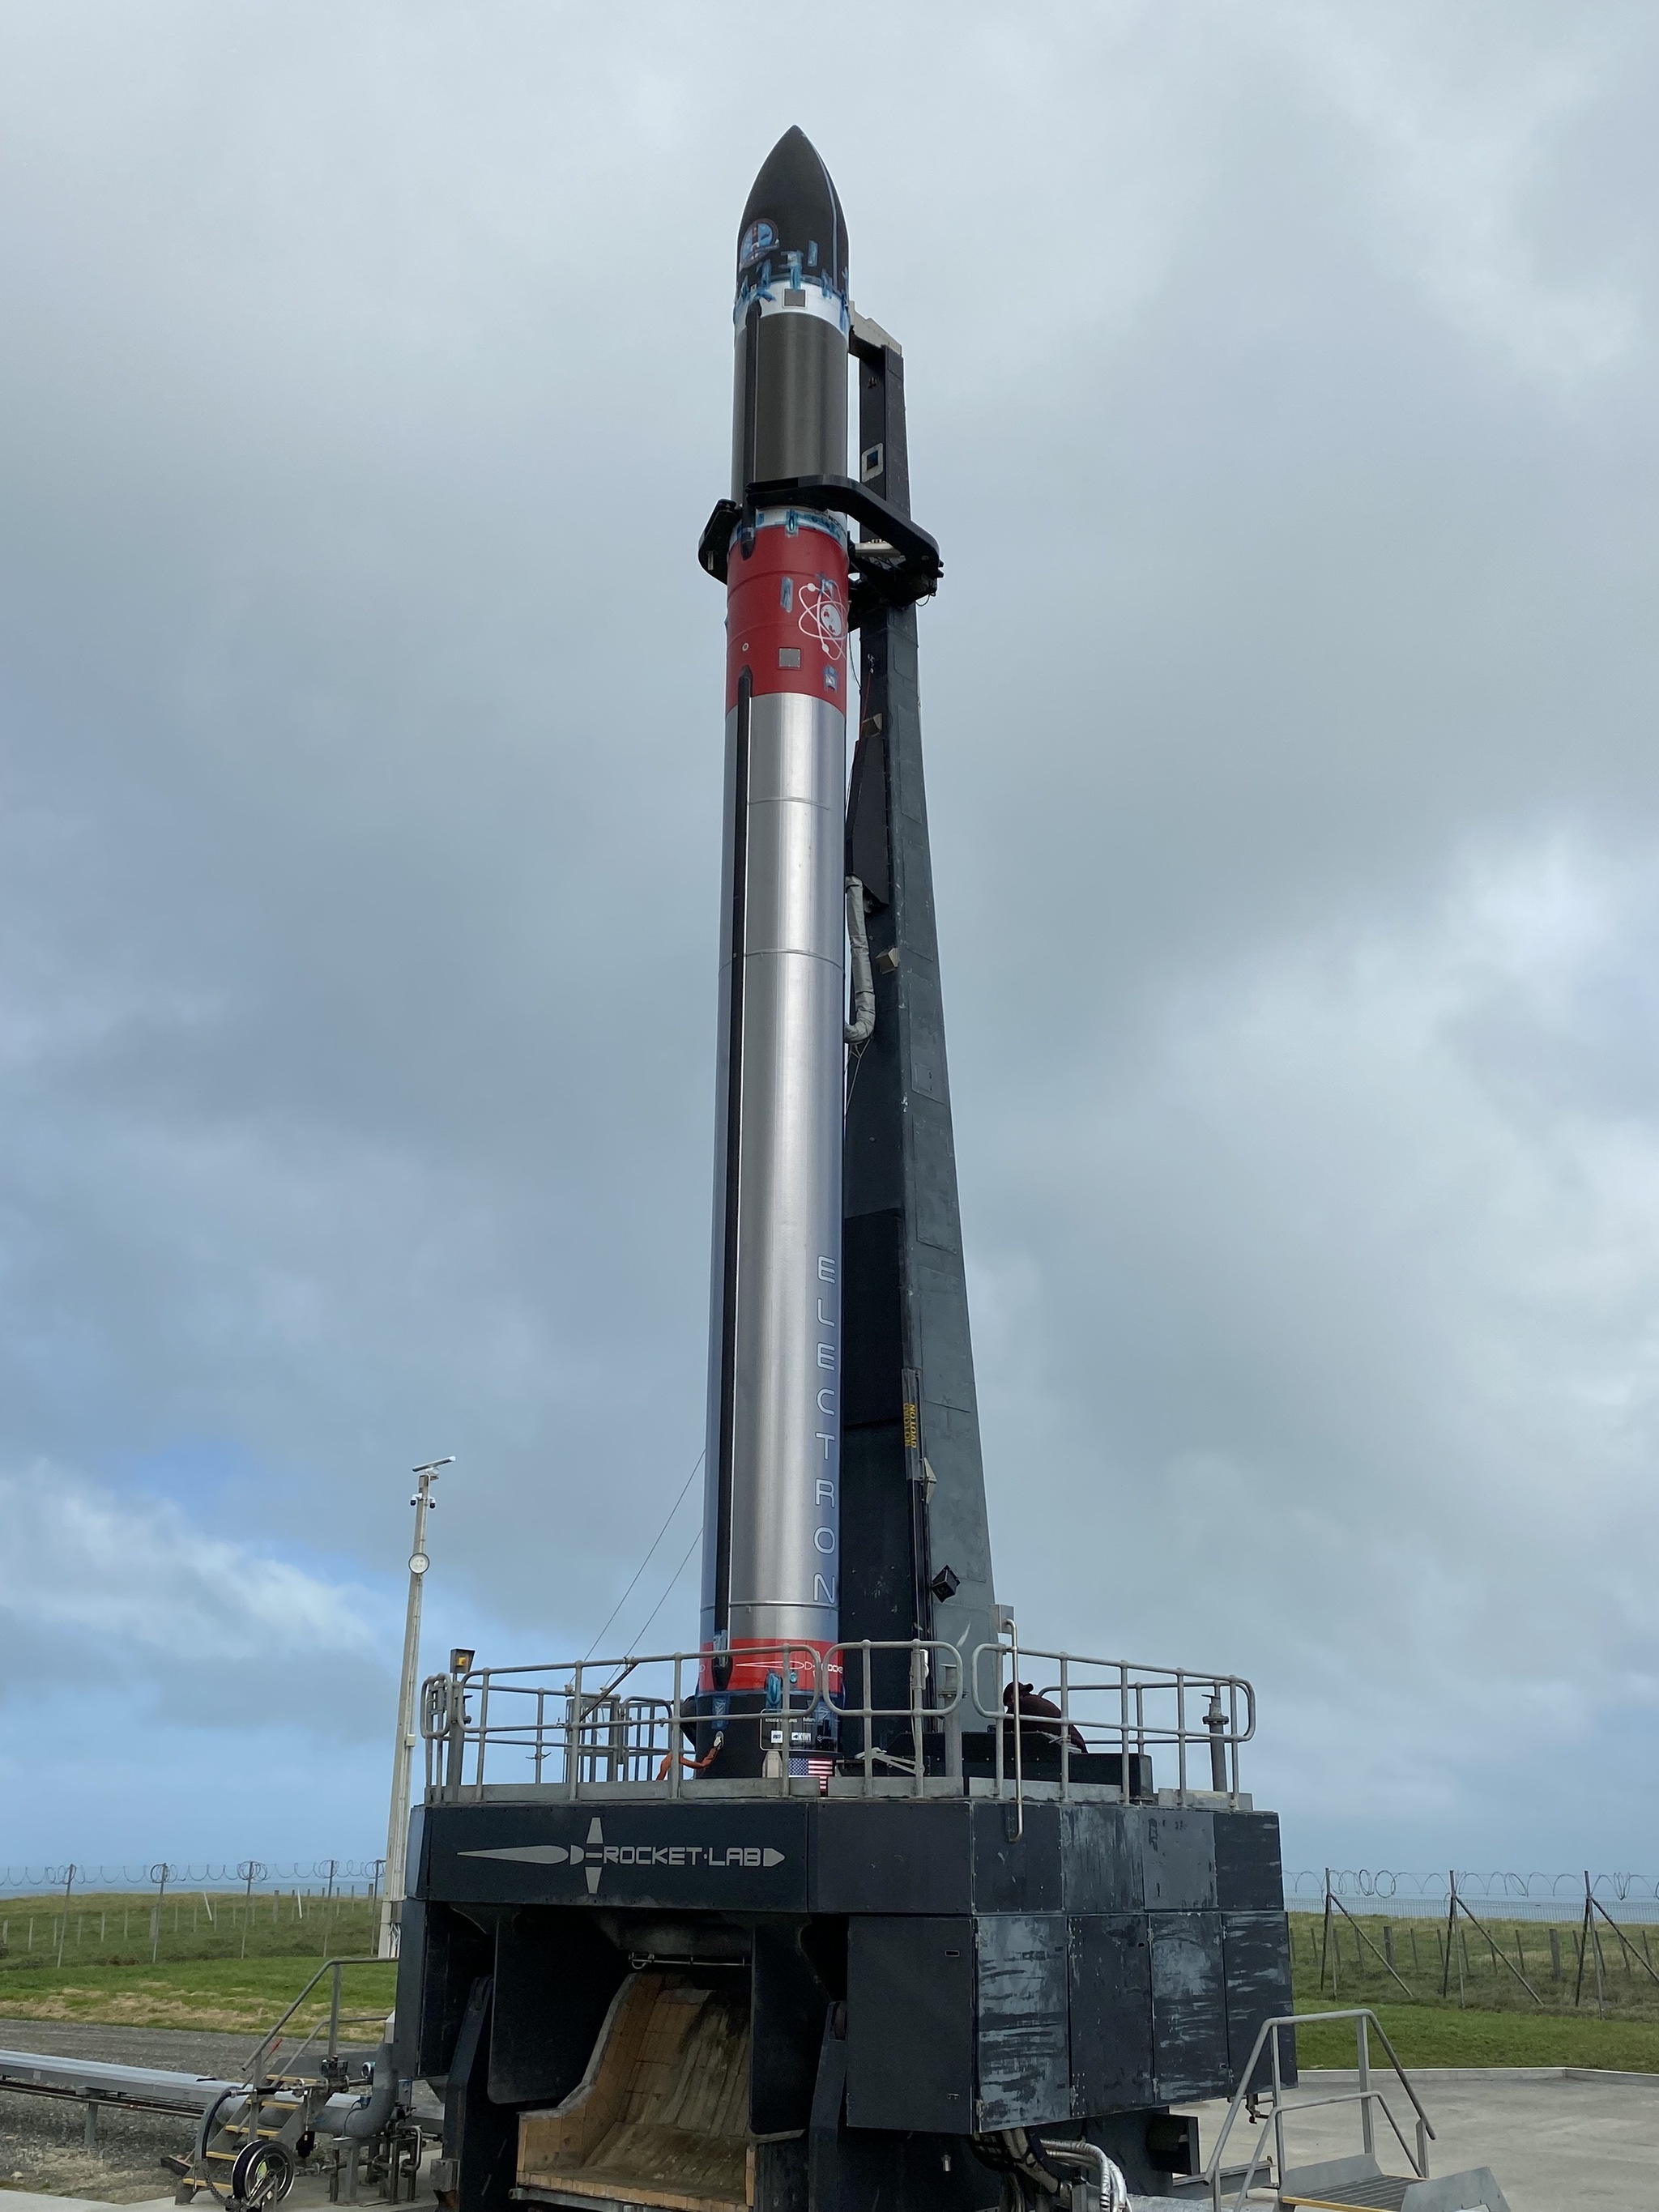 Rocket Lab Electron mission Round and Back - 34 satellites is being prepared for launch - Rocket, Space, Rocket launch, Rocket lab, Electron, Reusable rocket, Longpost